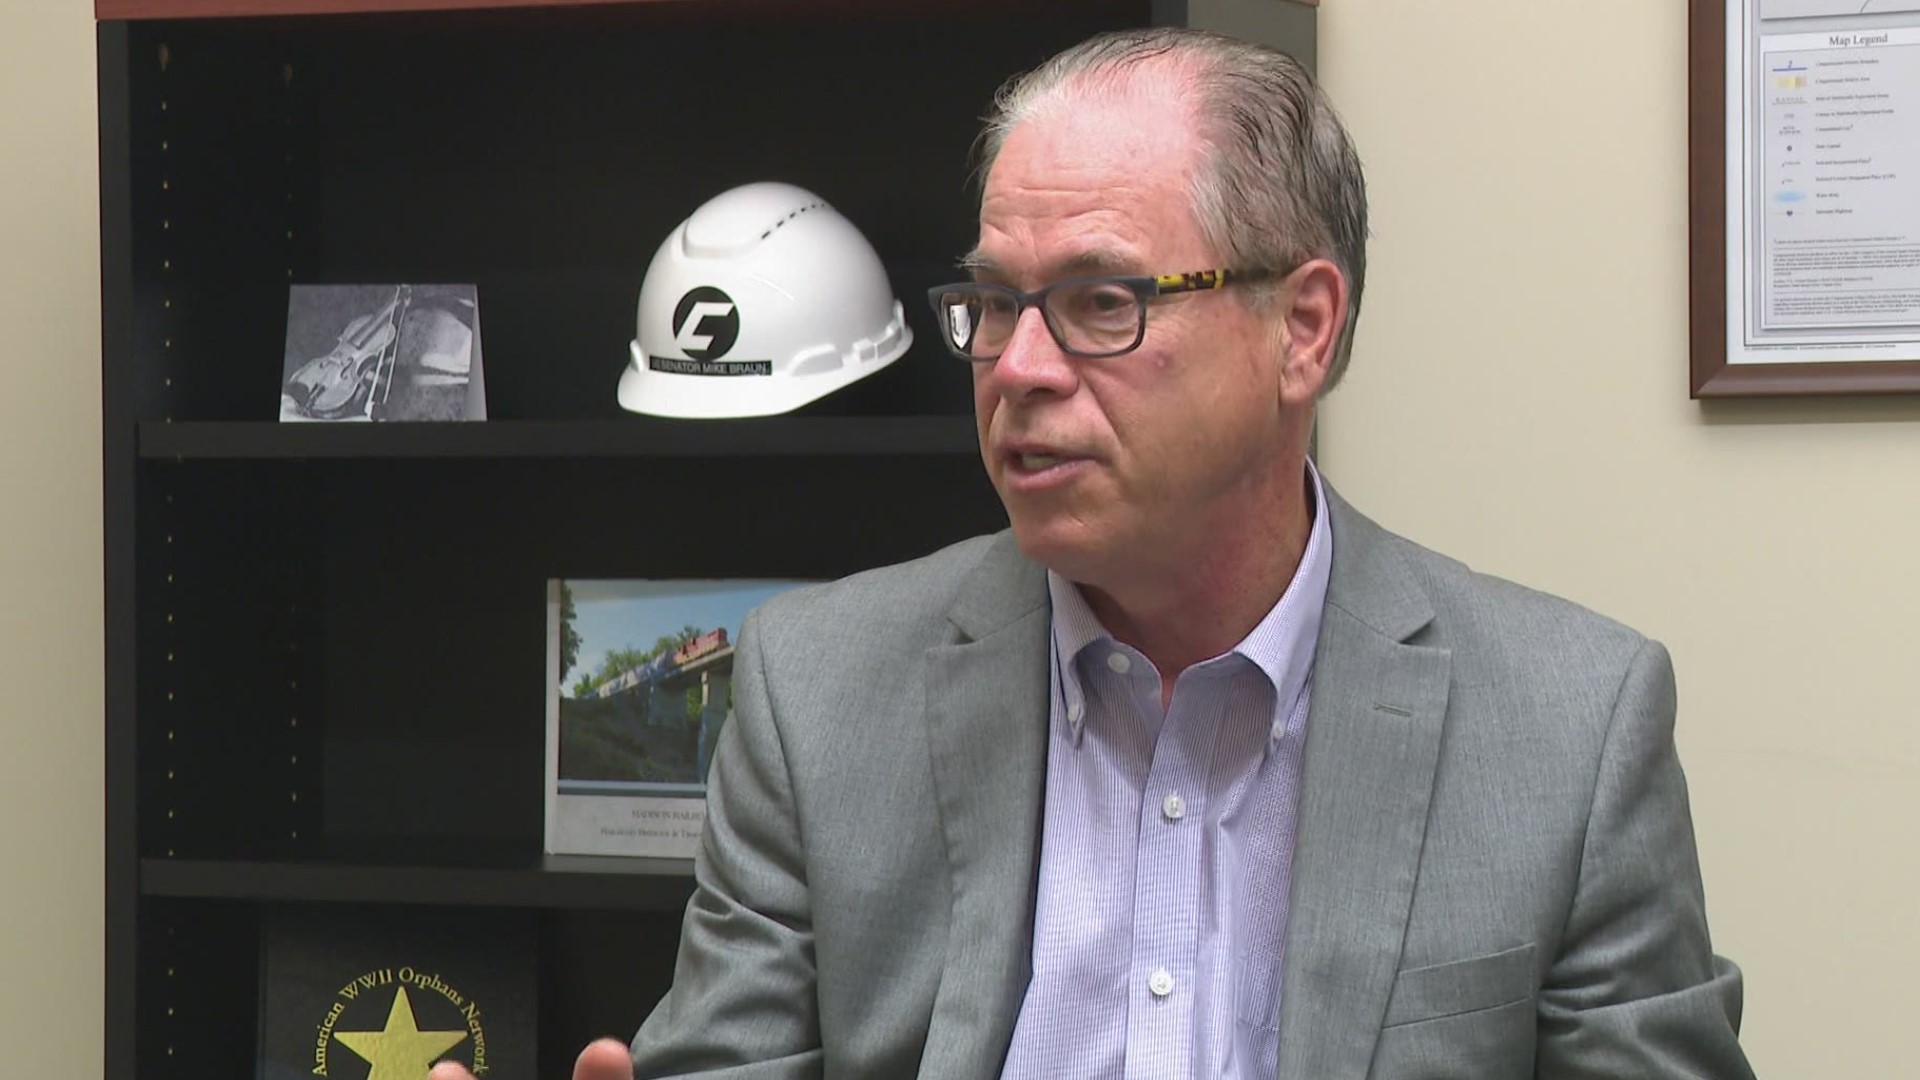 Senator Braun says he supports Governor Holcomb changing the mask mandate to an advisory.